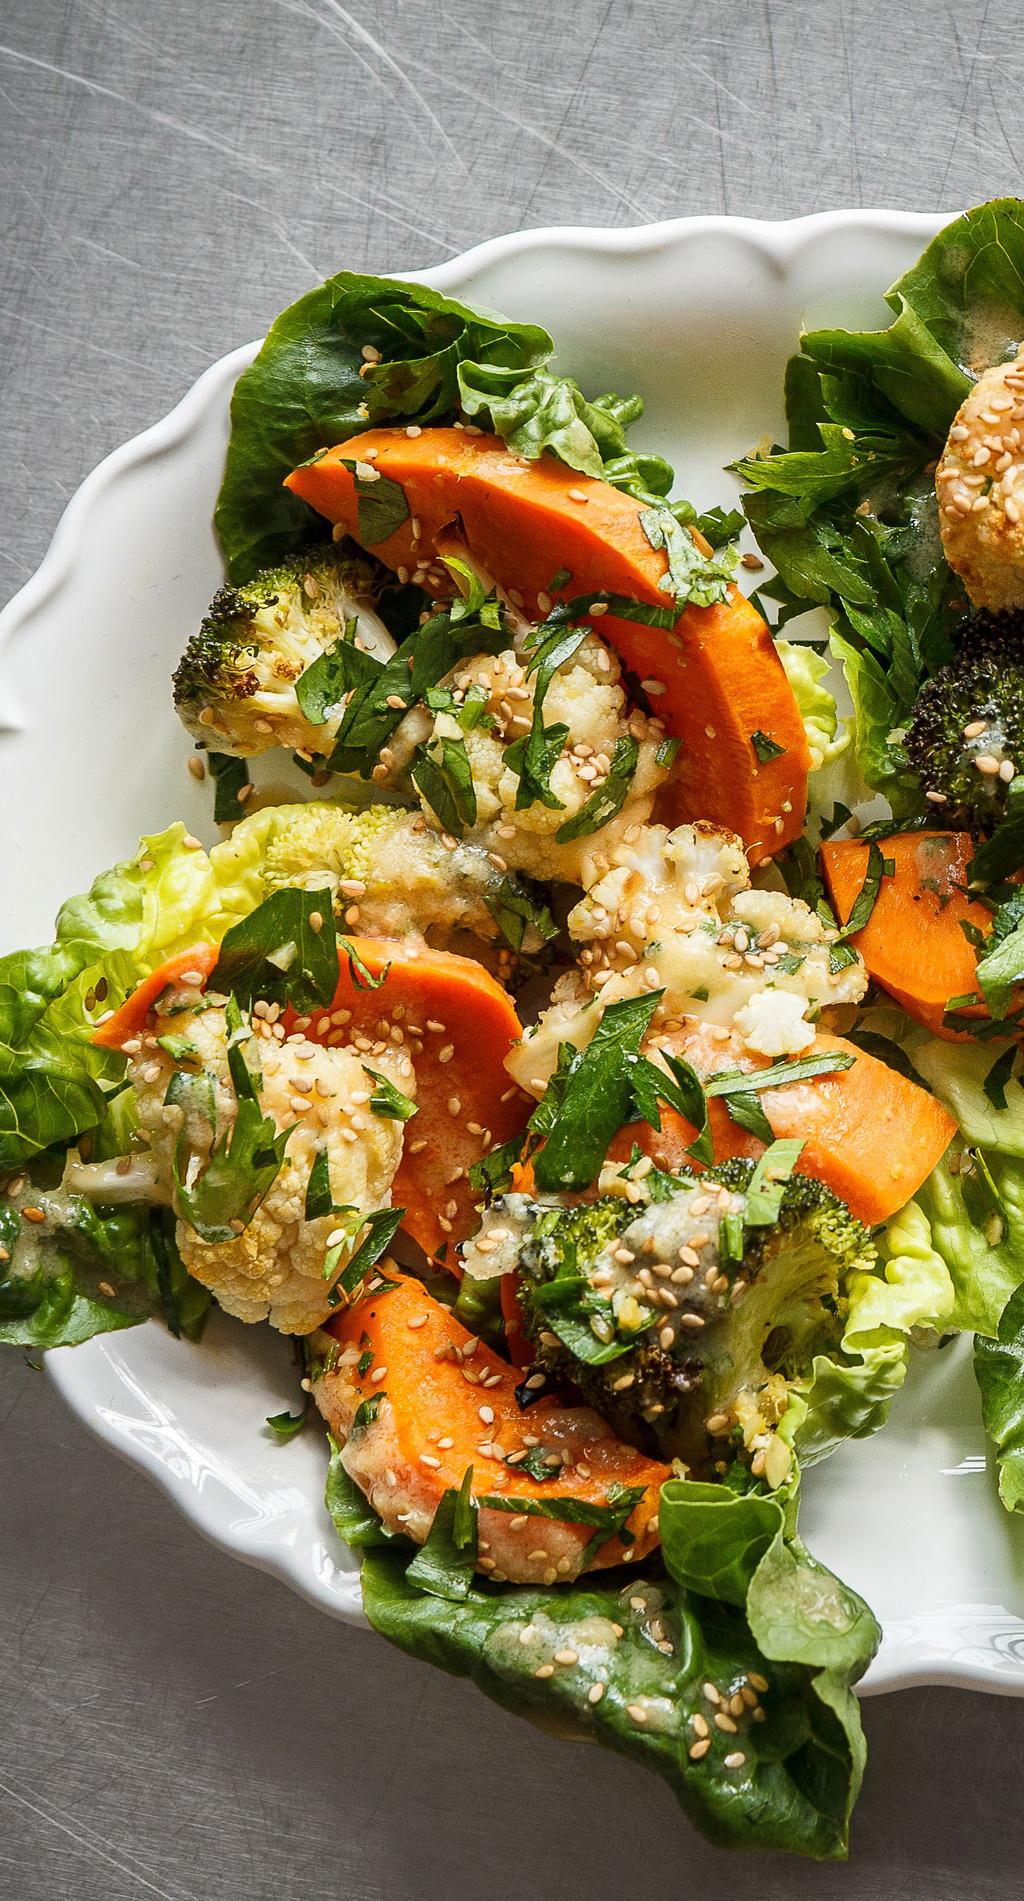 Roasted cauliflower, broccoli and sweet potato with a white miso dressing Cauliflower and broccoli slightly charred with a hint of ginger marries well with the sweet potato and white miso dressing,